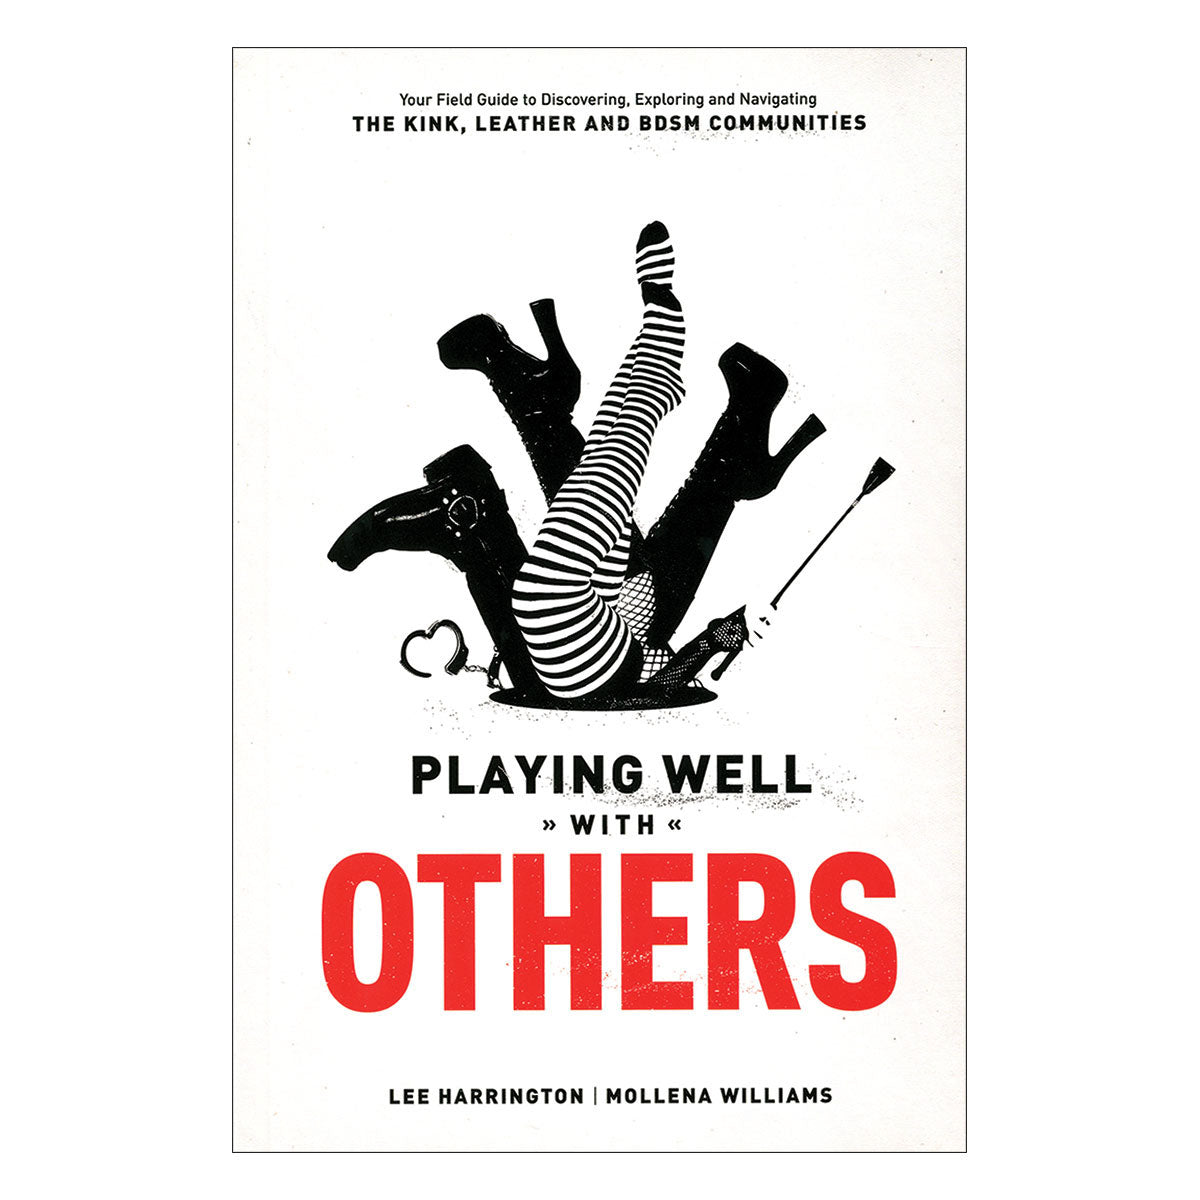 Playing Well With Others - Your Field Guide to Discovering, Exploring and Navigating the Kink, Leather and BDSM Communities - Greenery Press